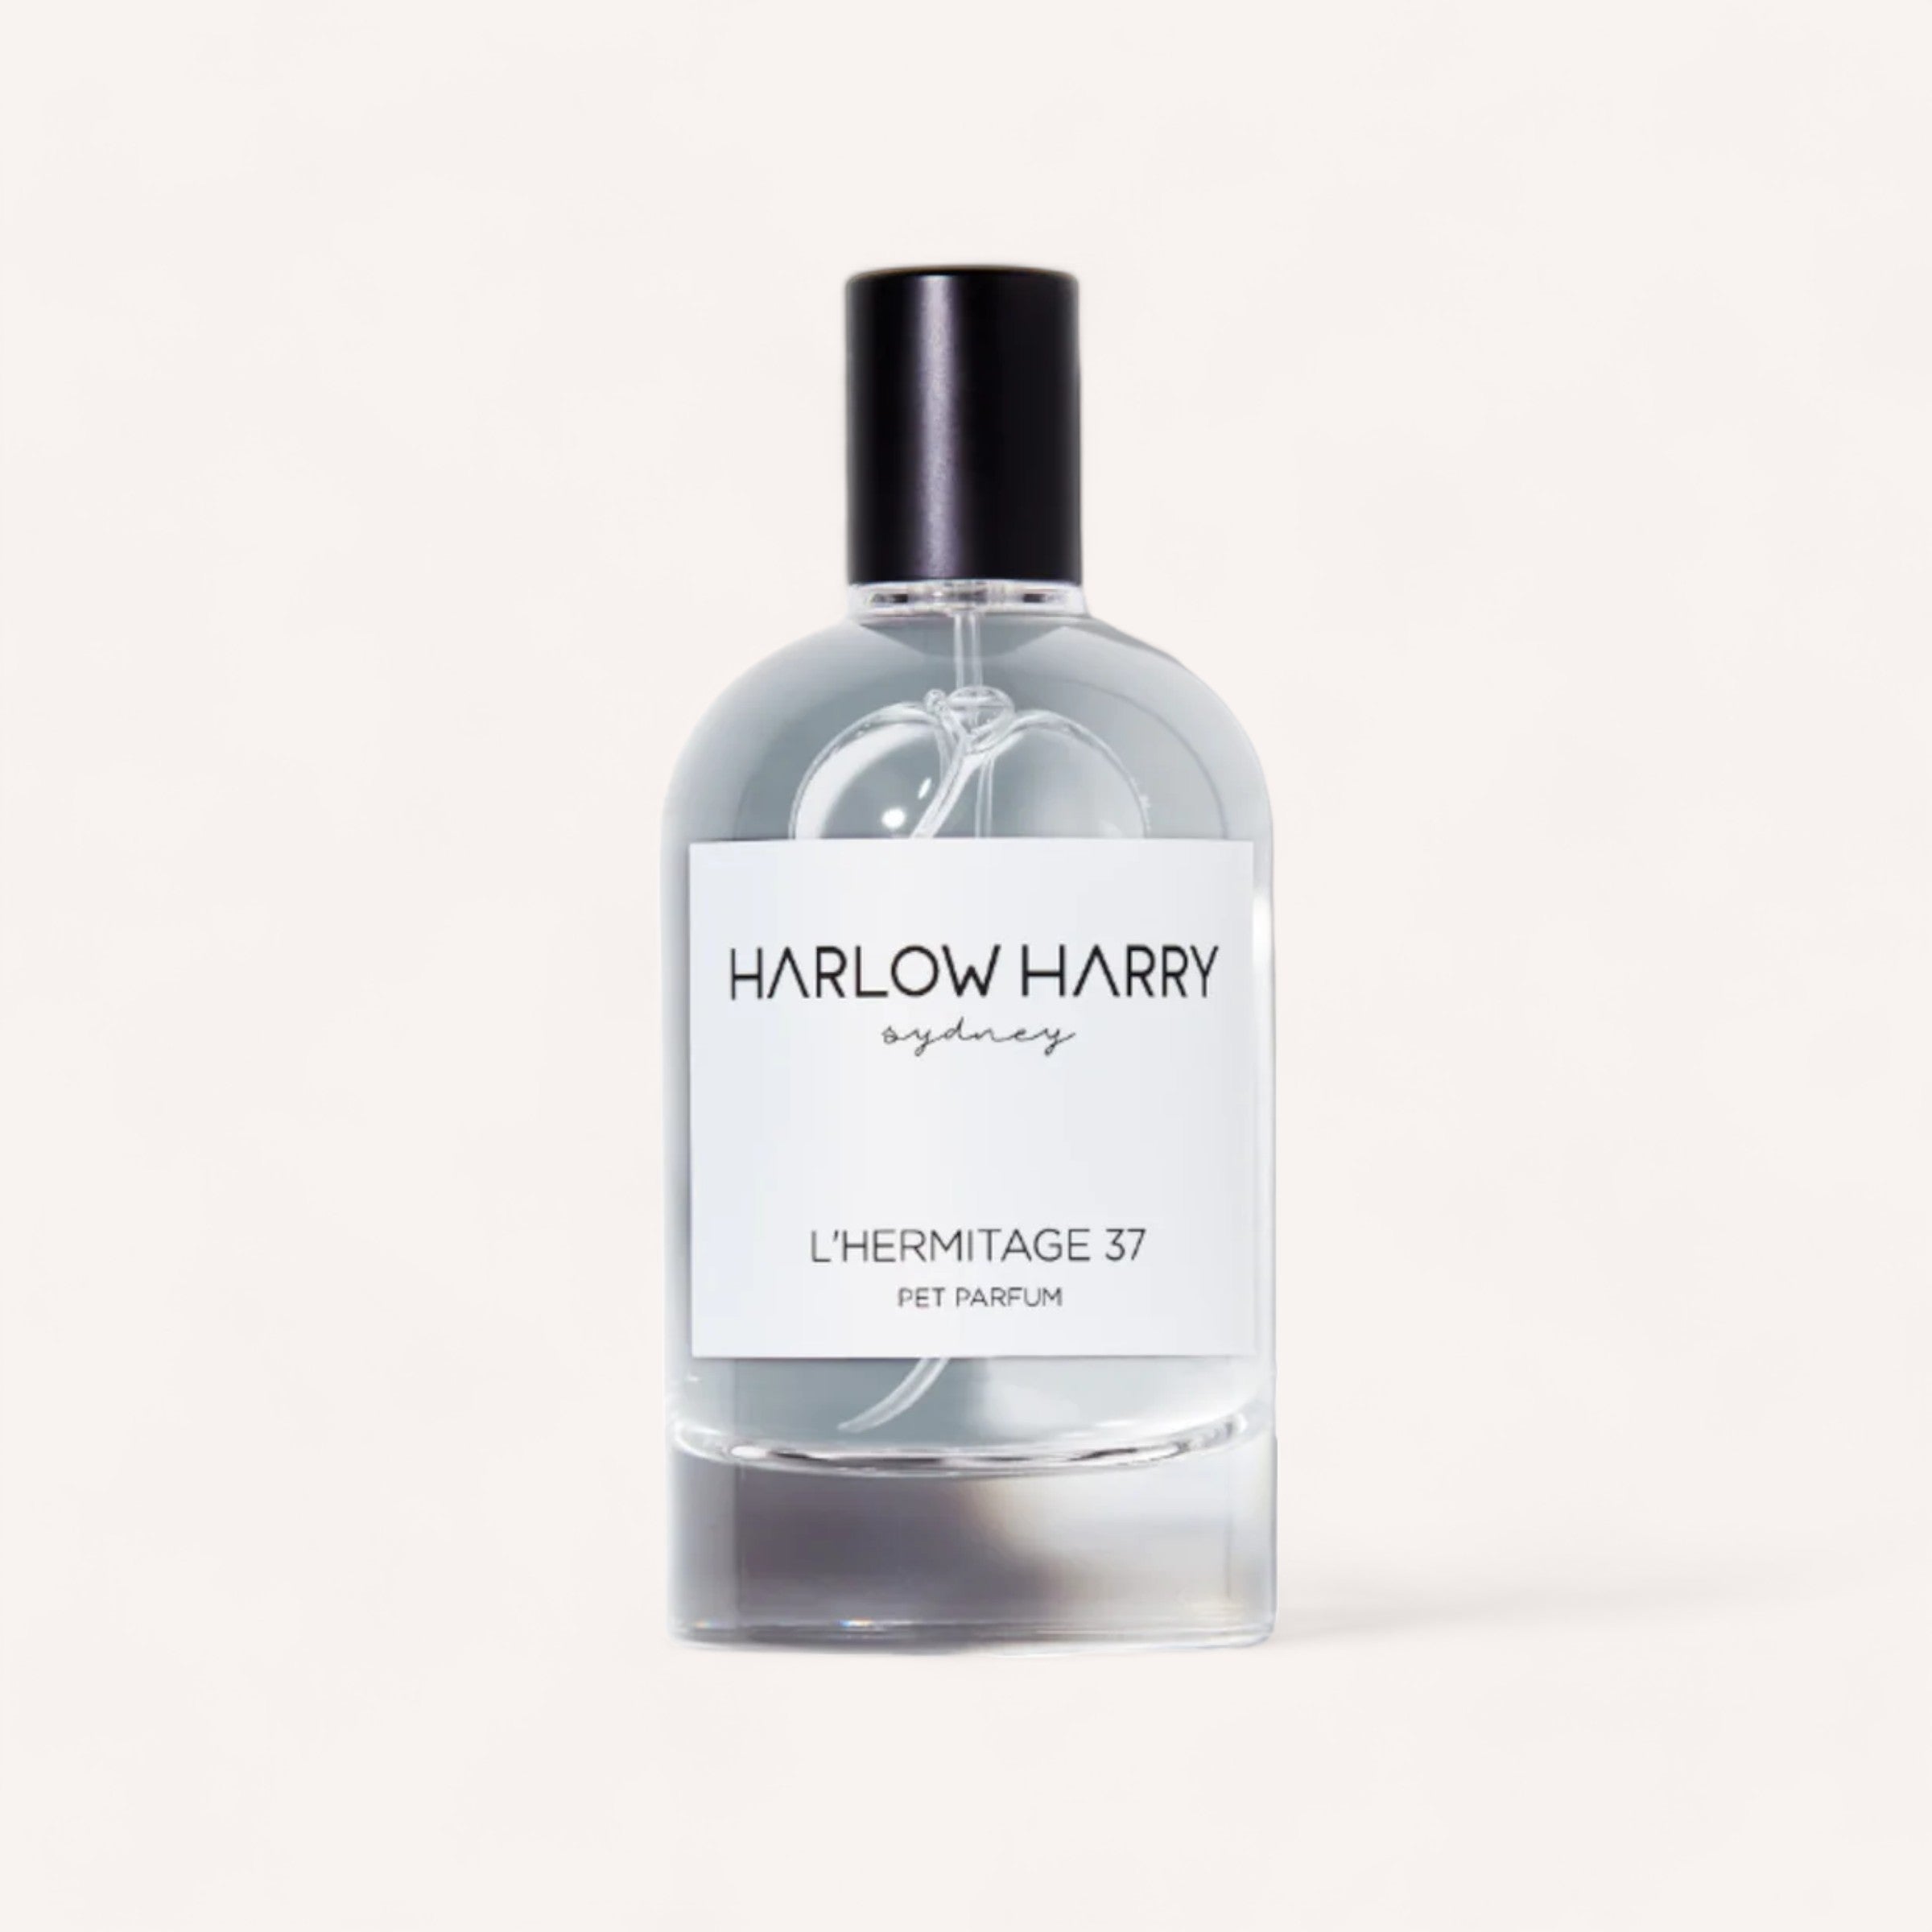 A sleek bottle of L'hermitage 37 Dog Perfume by Harlow Harry for dogs against a clean, white background.